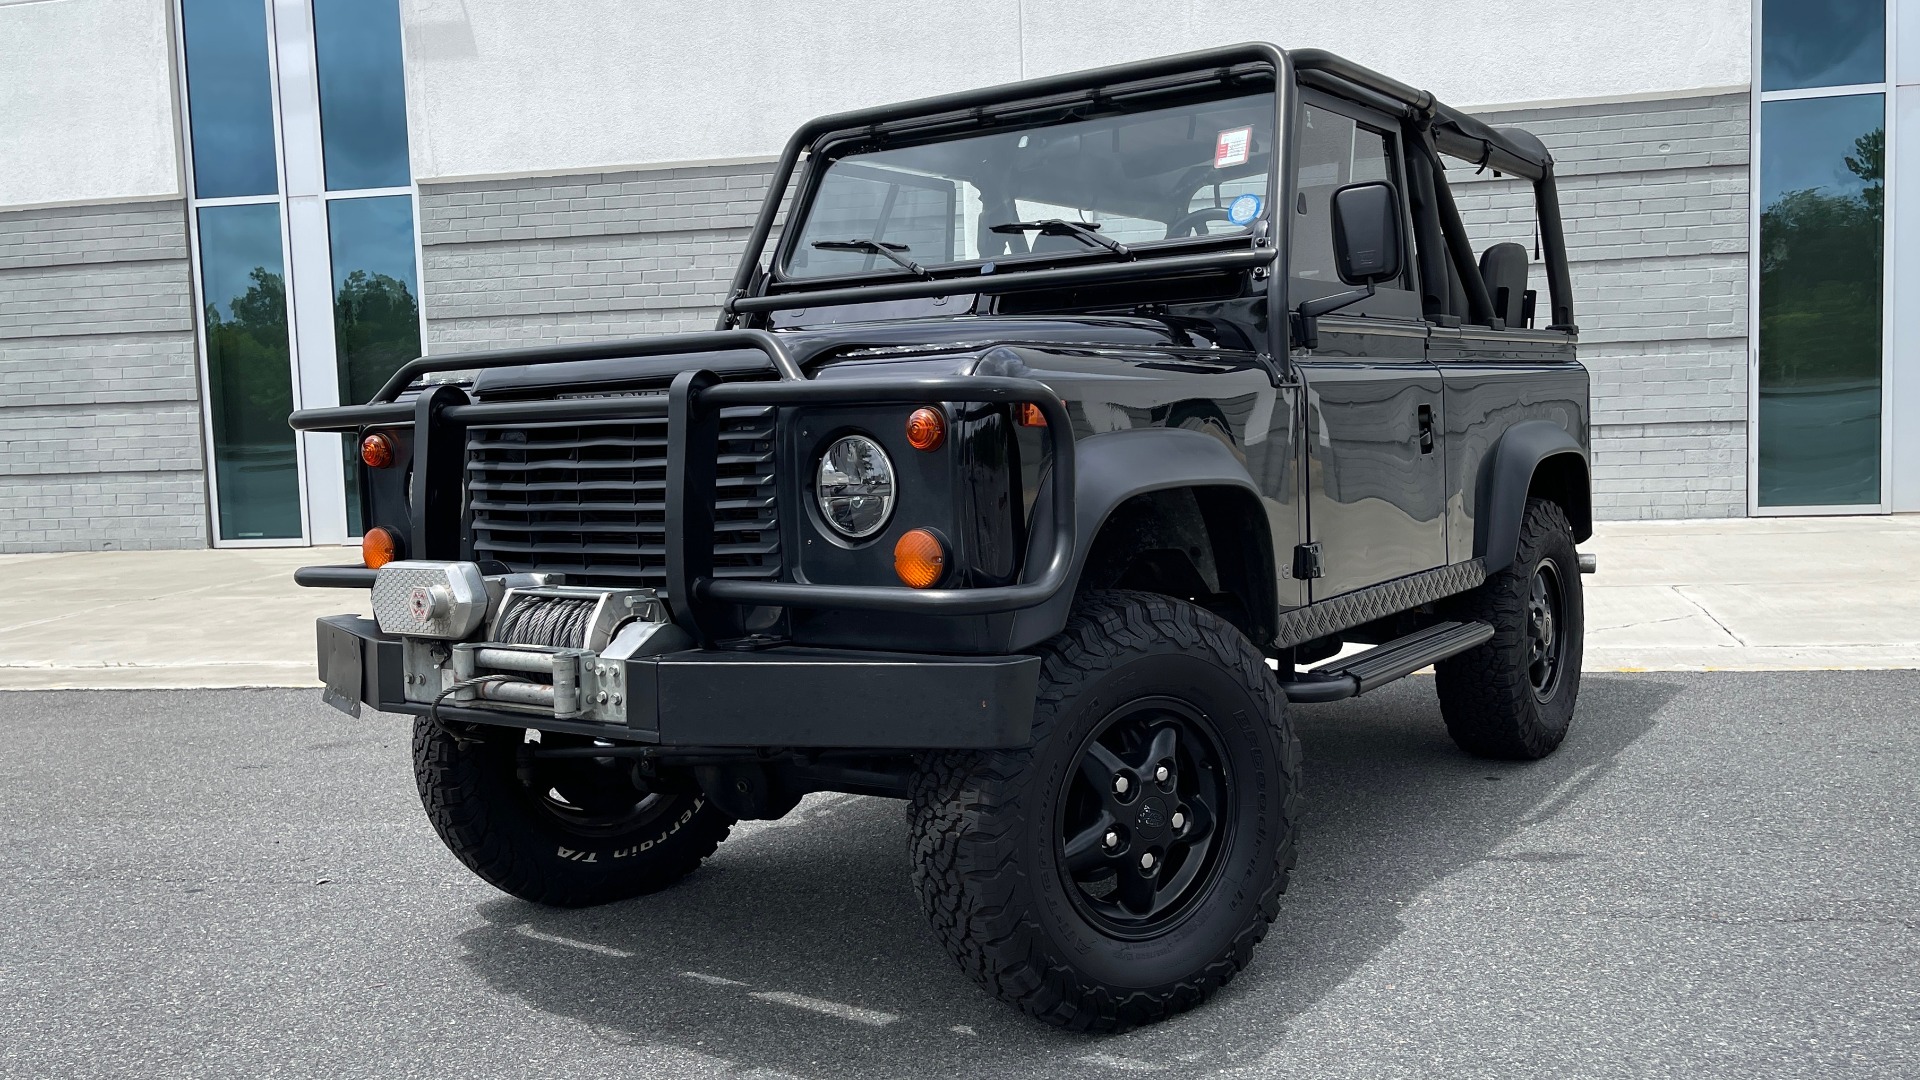 Used 1995 Land Rover DEFENDER 90 4x4 / 3.9L V8 / SOFT-TOP / 5-SPD MANUAL / RUNS GREAT for sale Sold at Formula Imports in Charlotte NC 28227 2